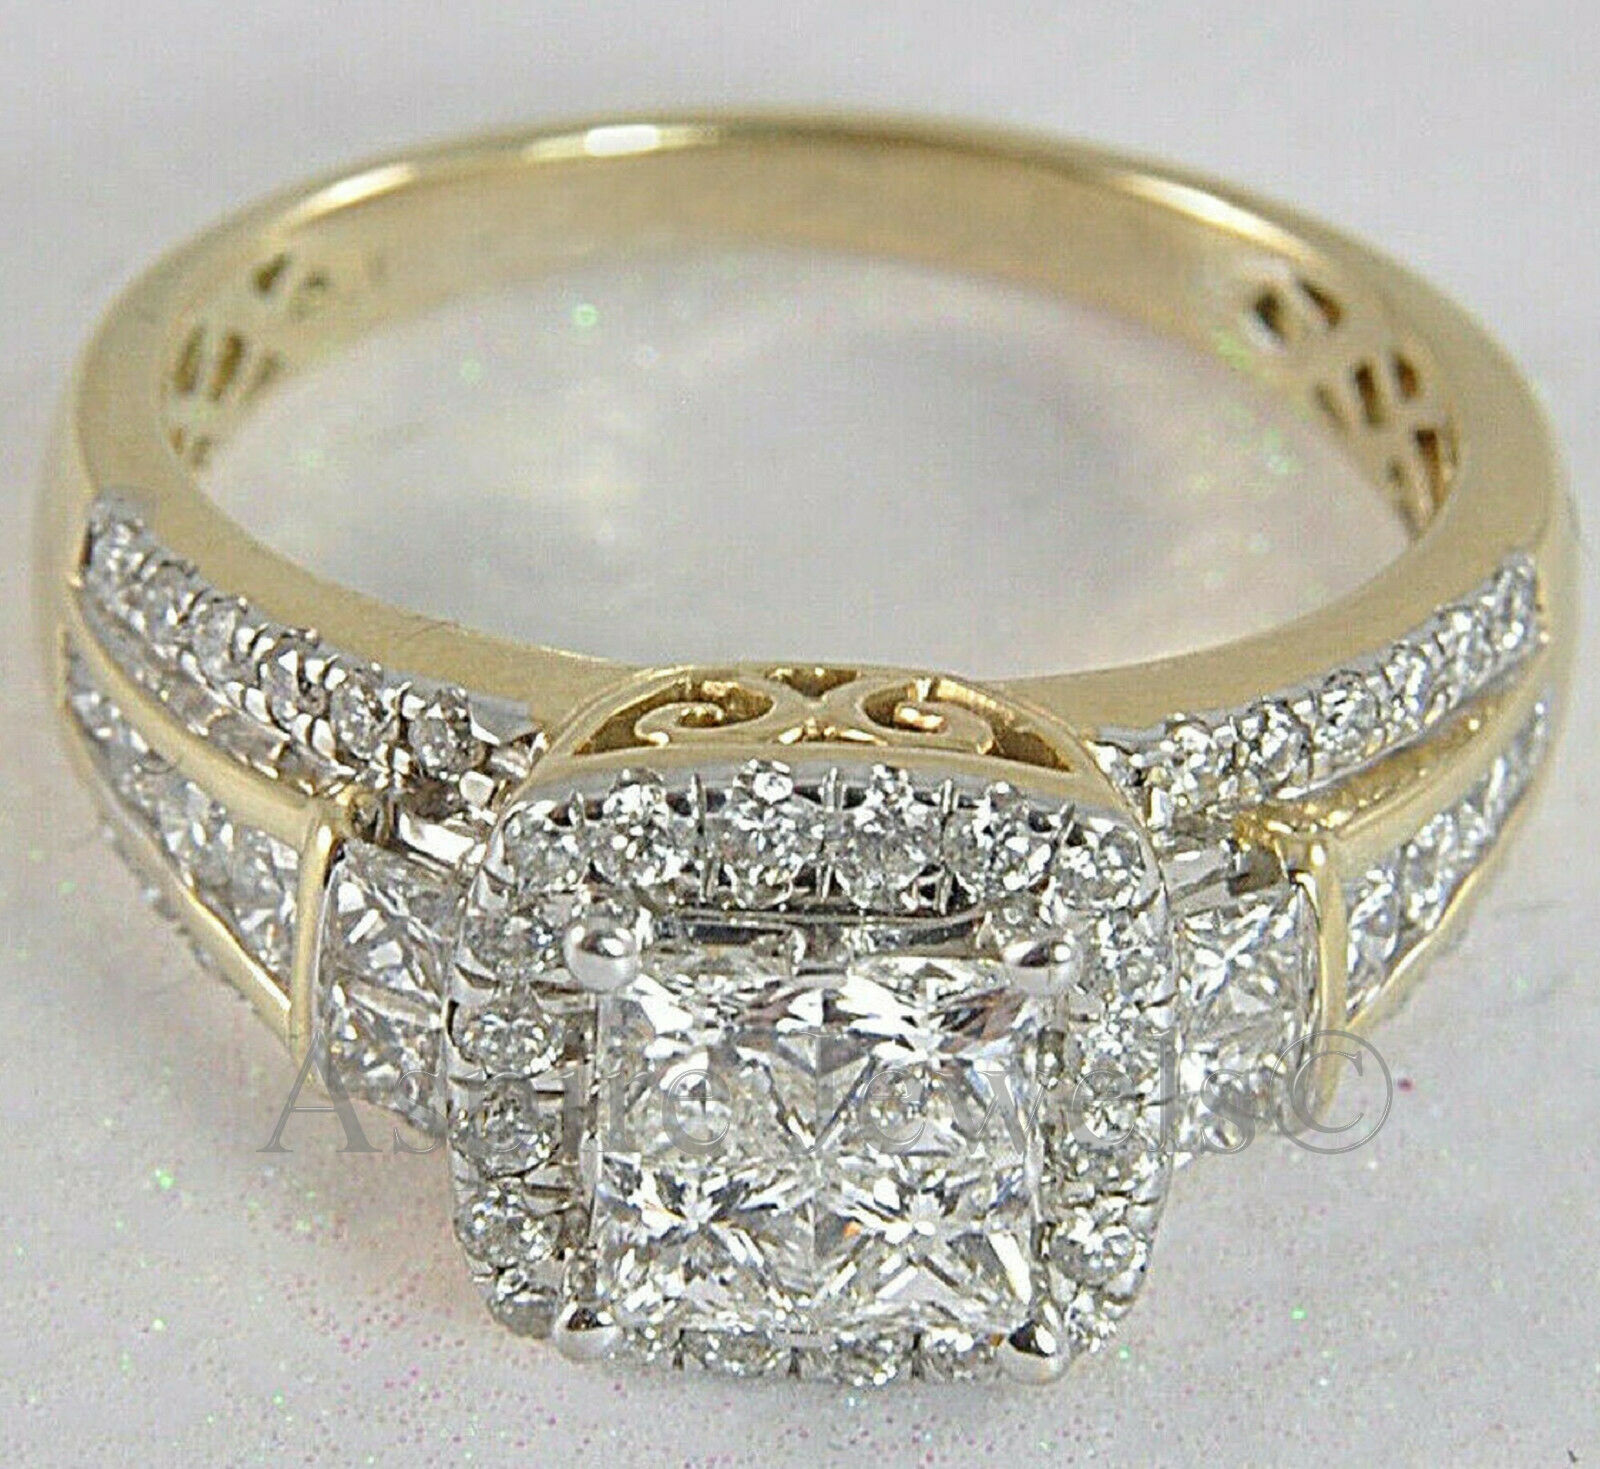 3.25ct Princess Cut Invisible Diamond Engagement Ring Solid 14k Yellow Gold